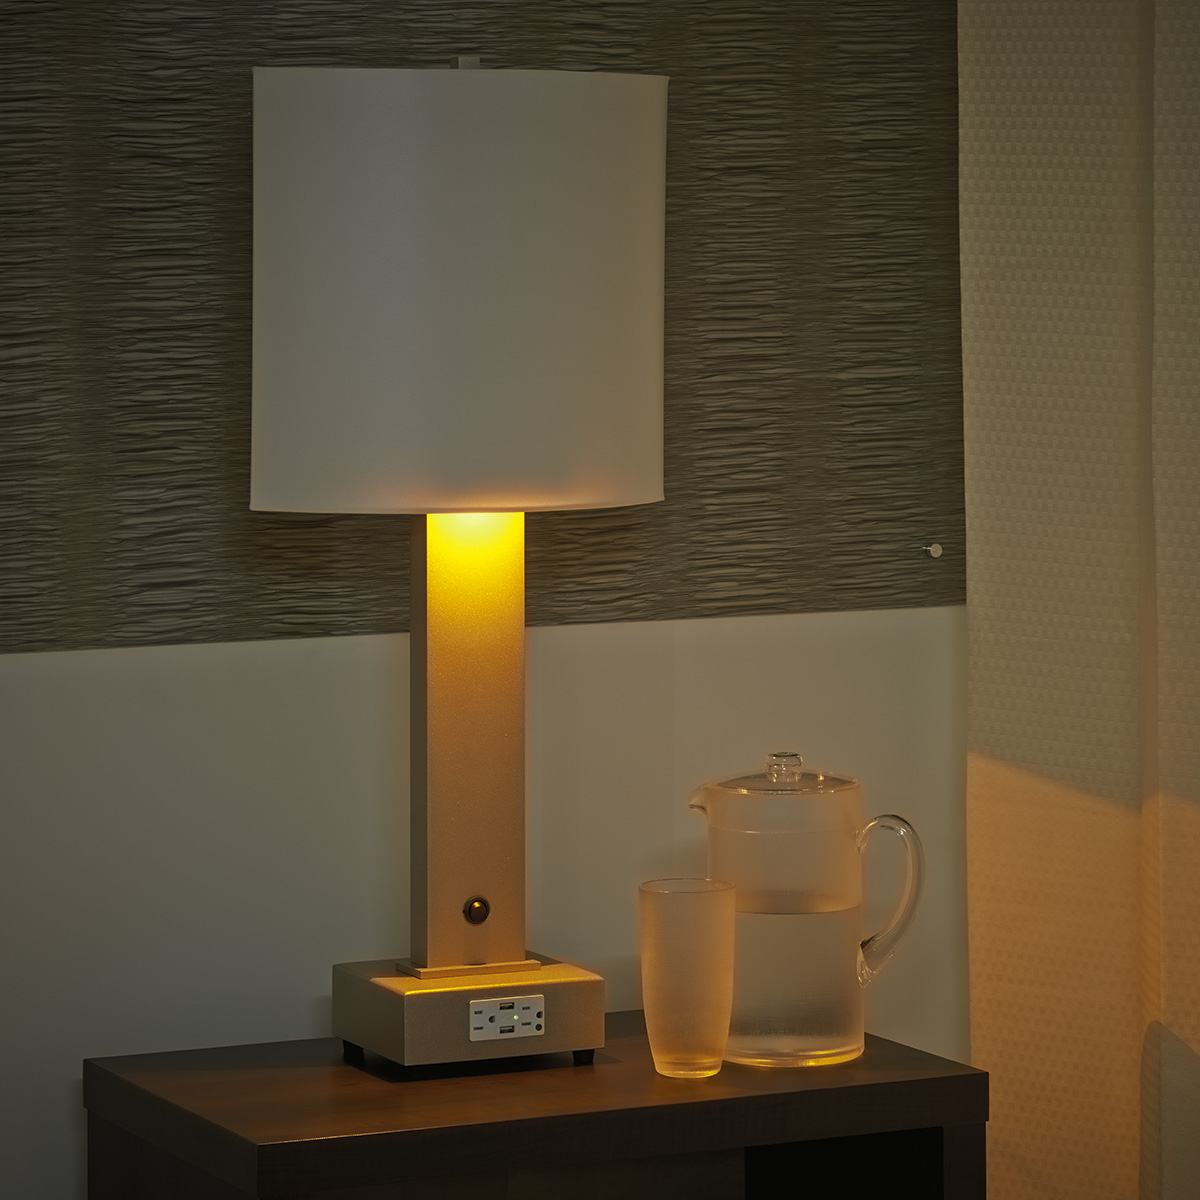 Table lamp next to hospital bed with night mode amber light